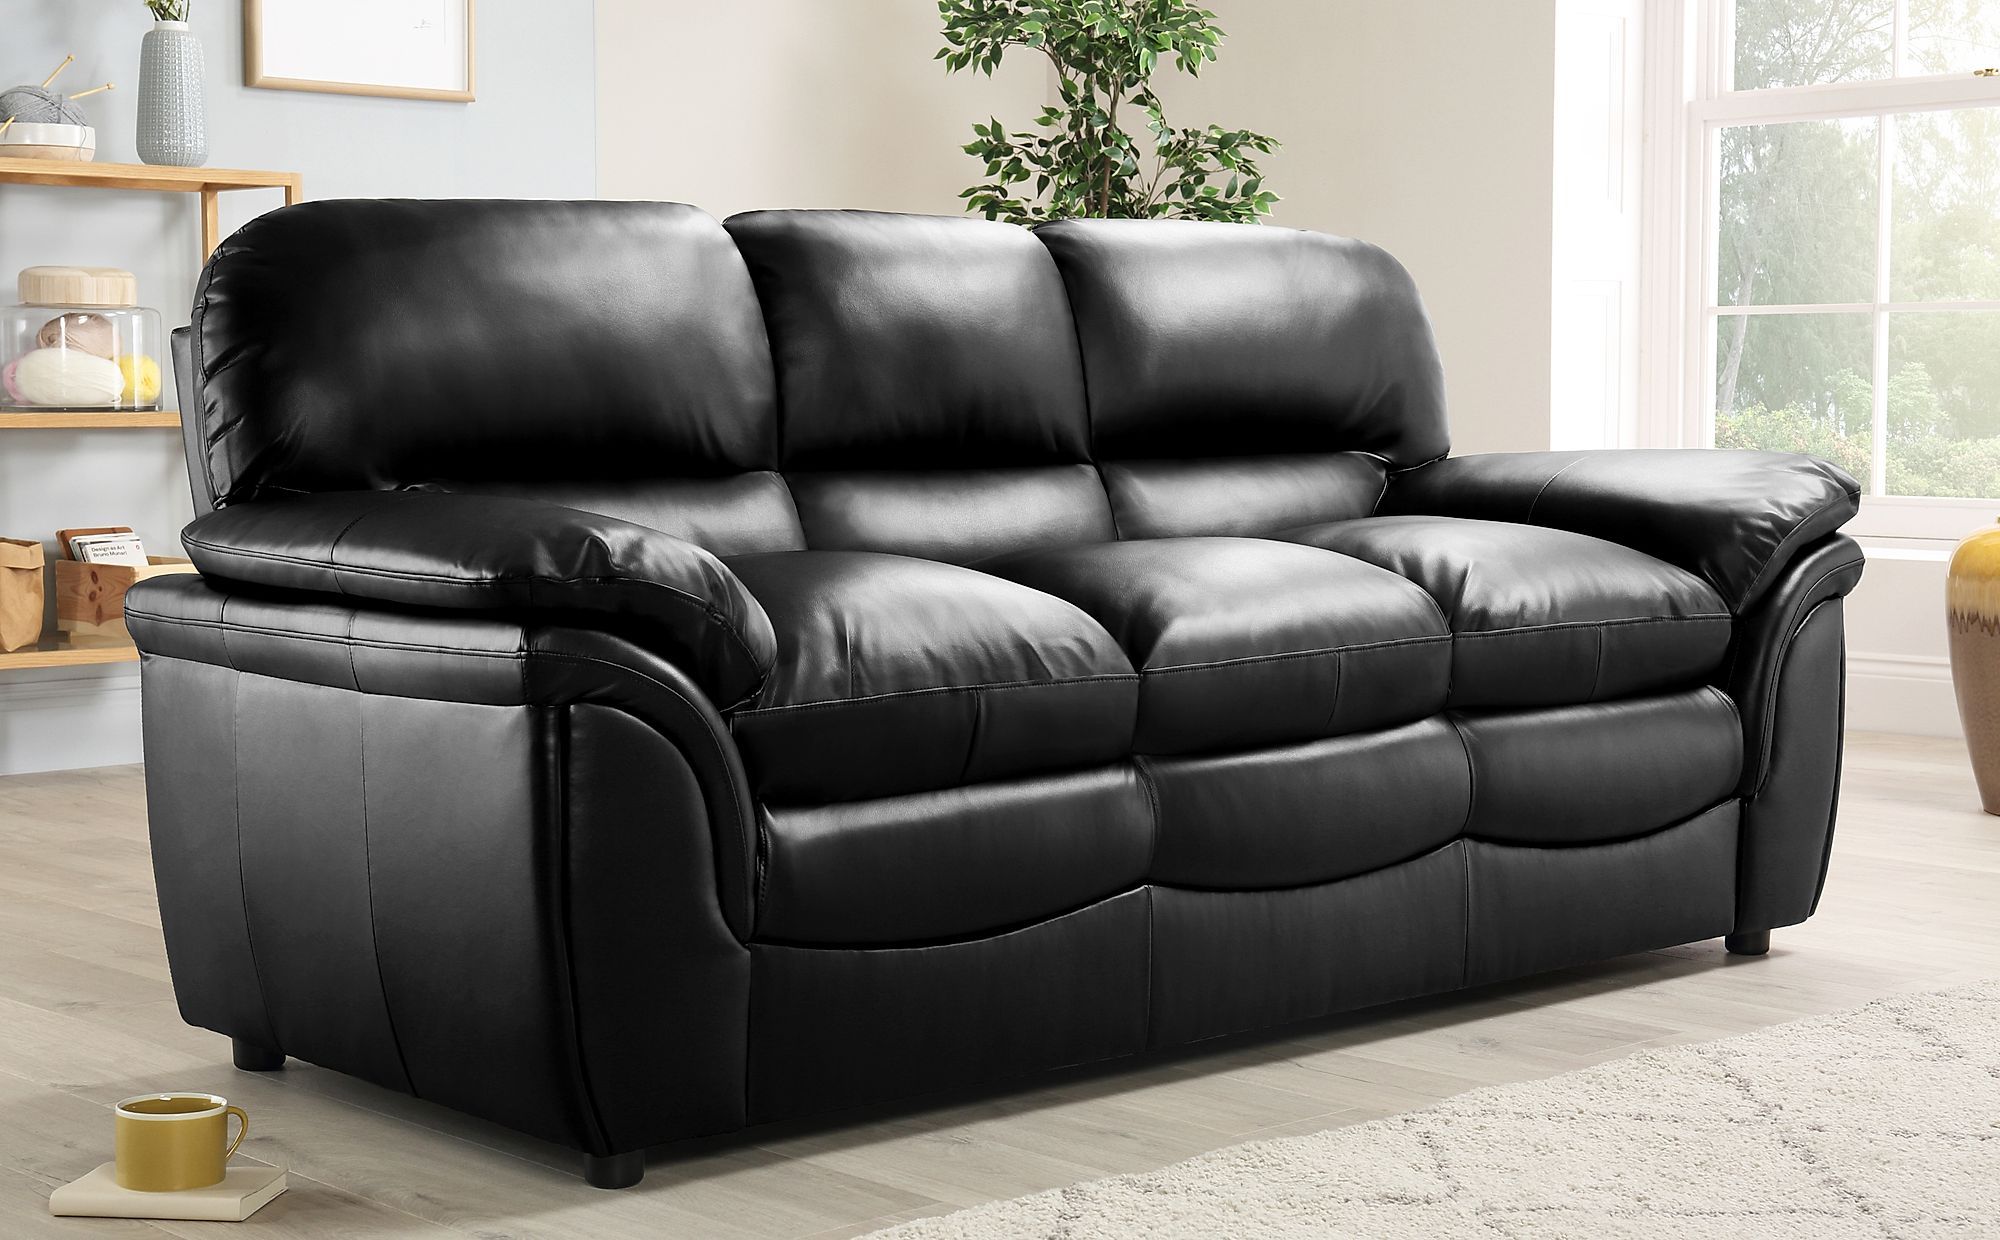 Rochester Black Leather 3 Seater Sofa | Furniture Choice Within Sofas In Black (Gallery 6 of 20)